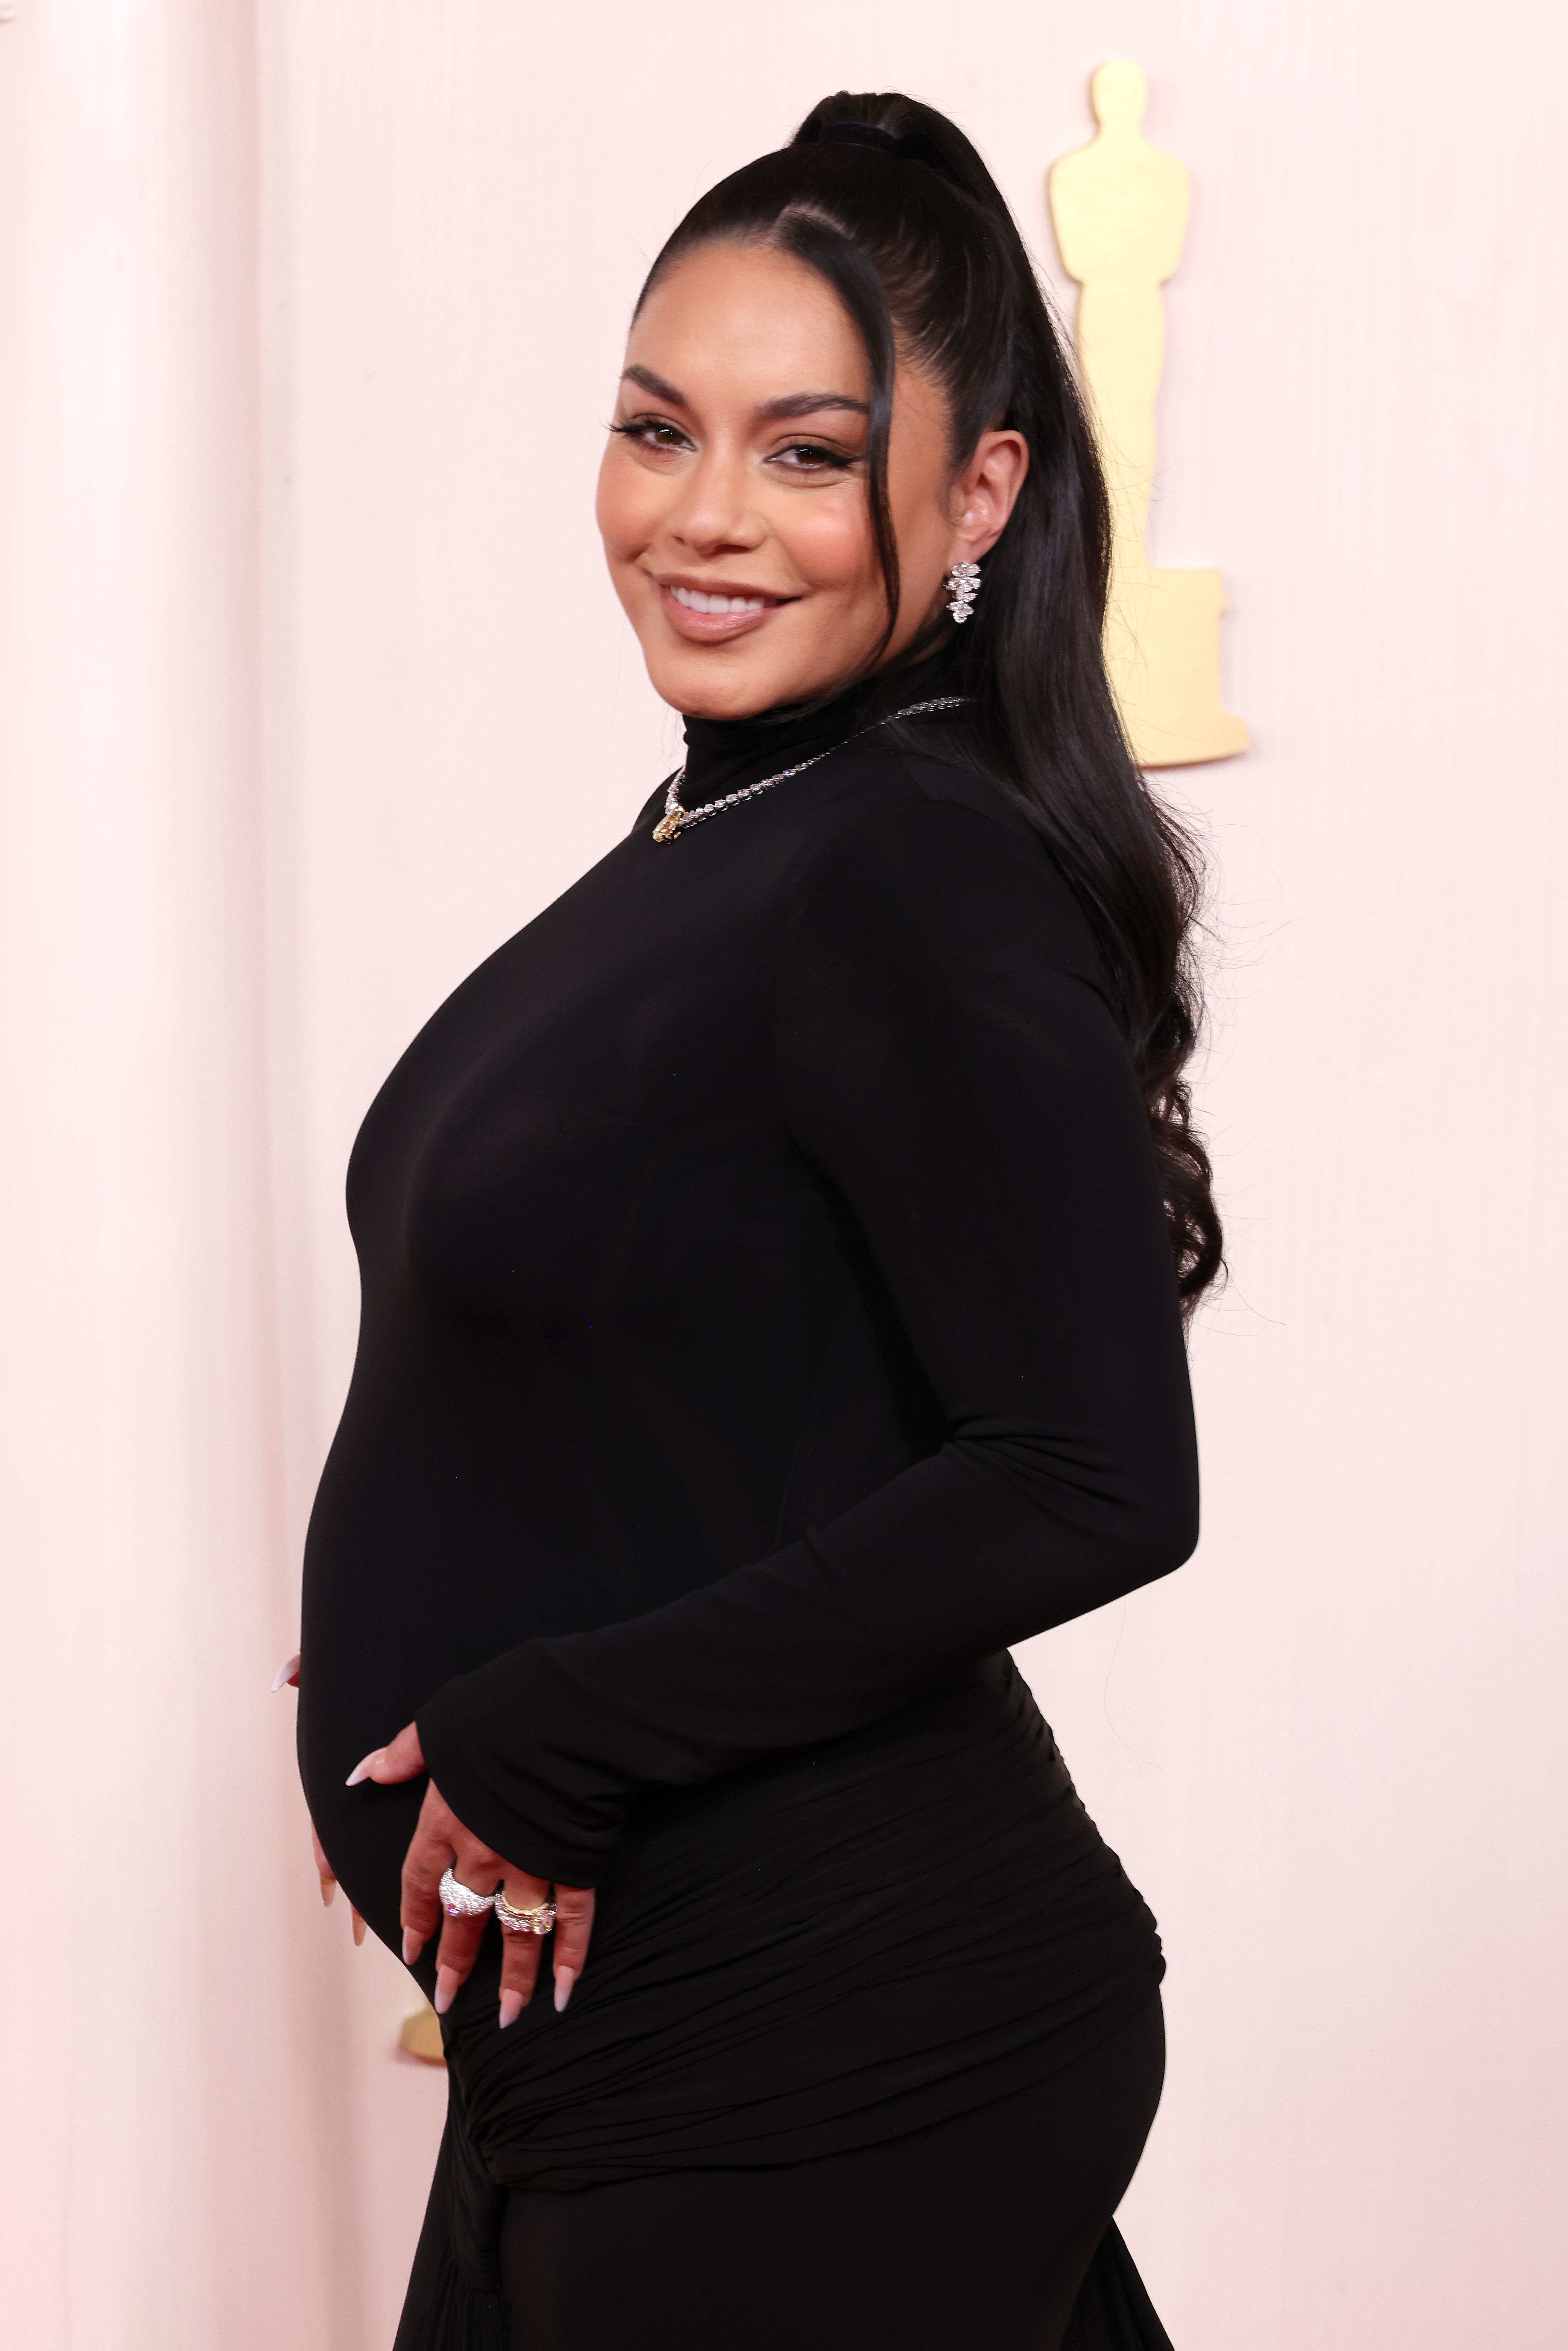 The High School Musical star revealed that she was pregnant at the 2024 Oscars.